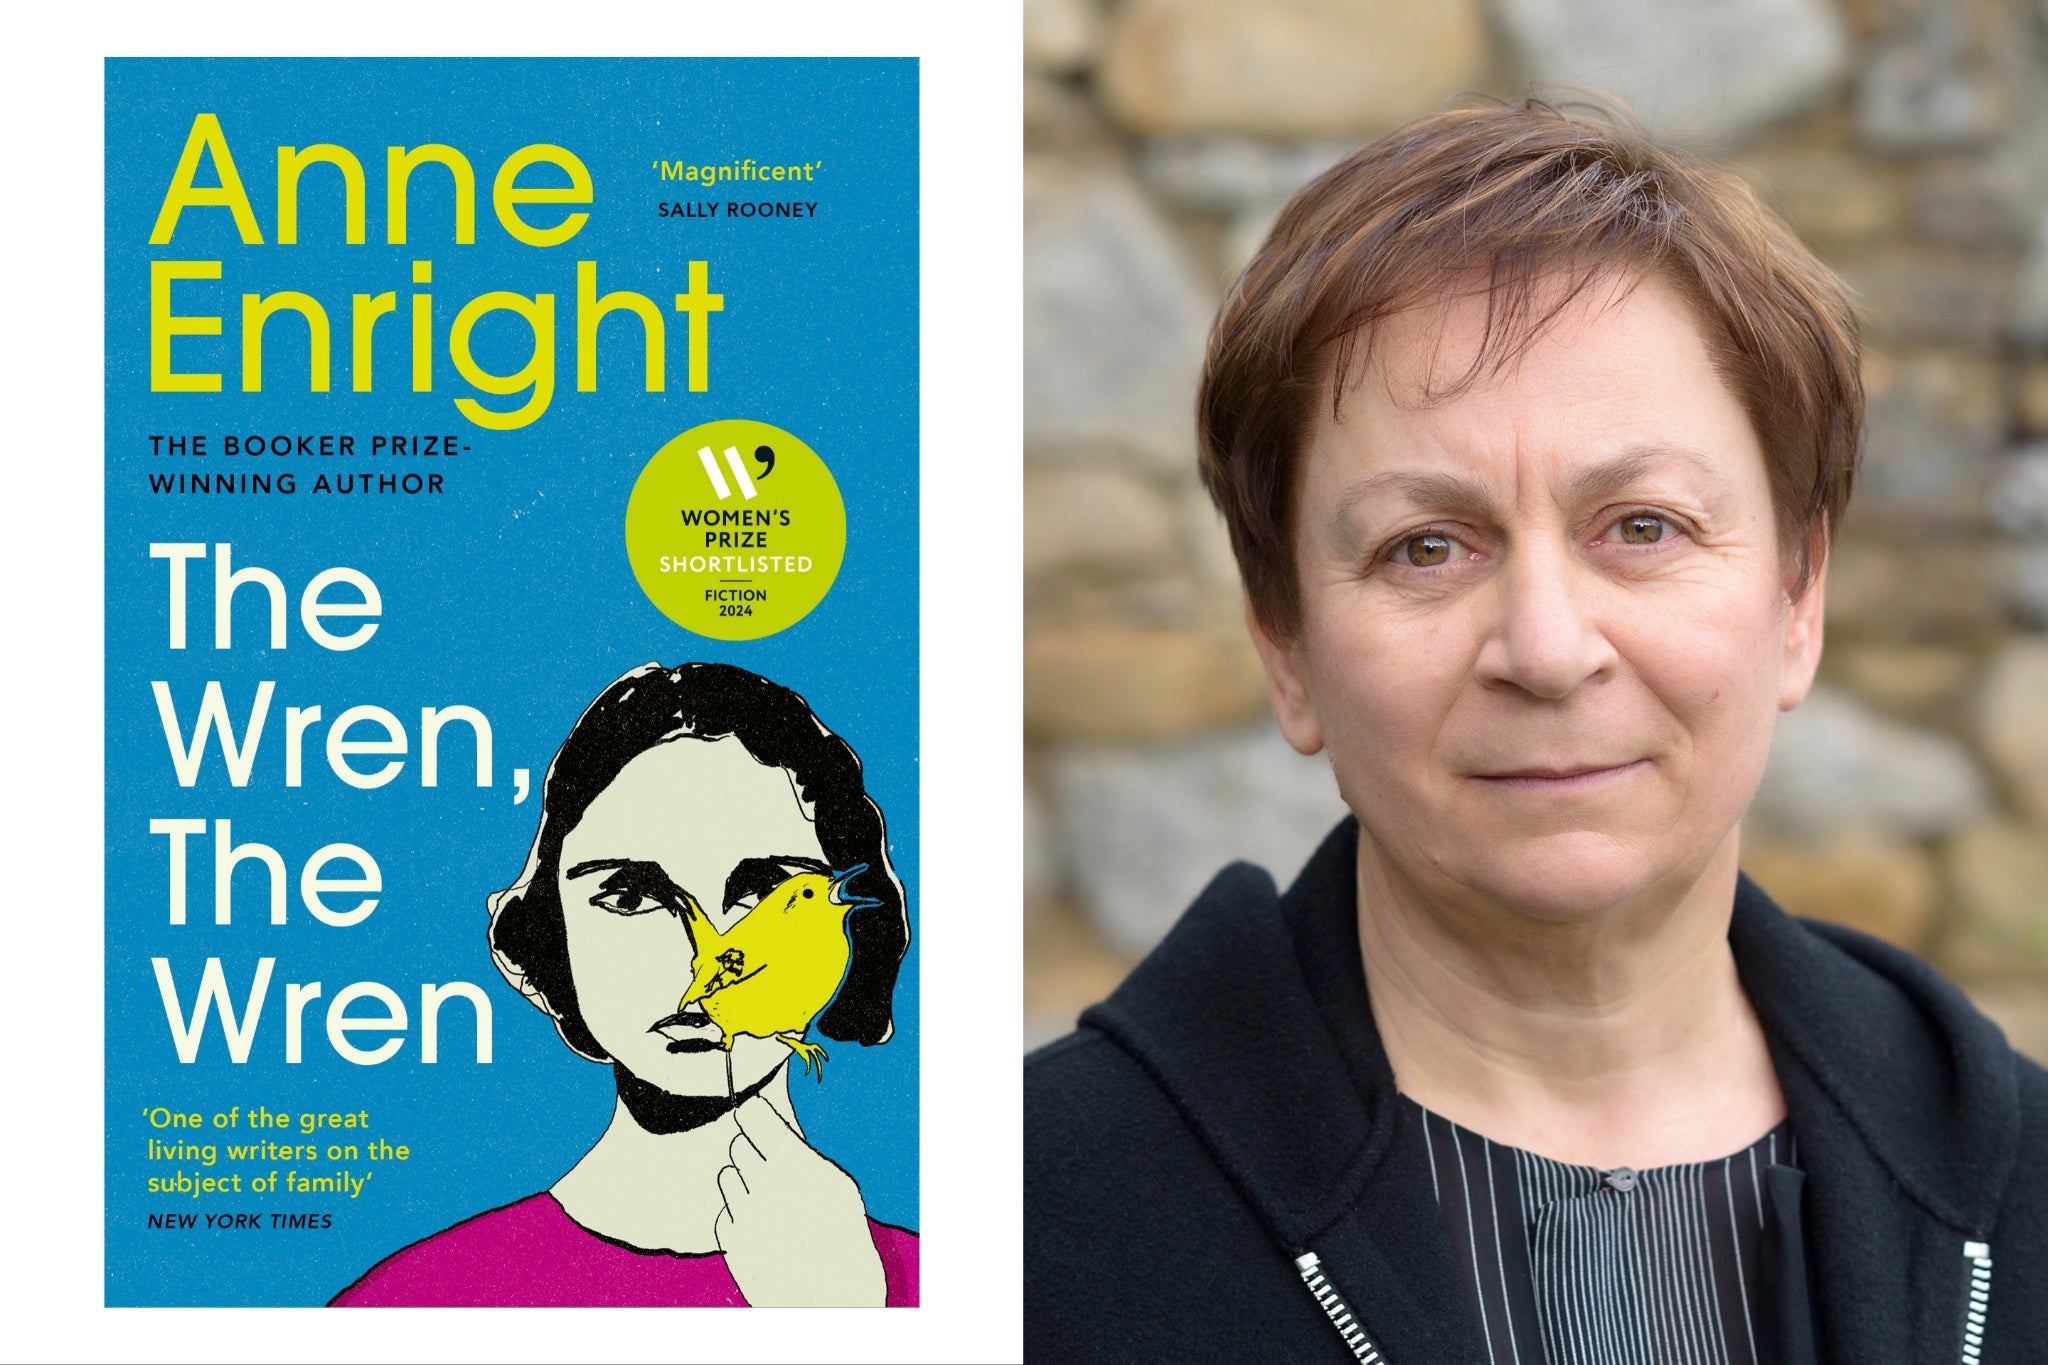 The Wren, The Wren and its author, Anne Enright